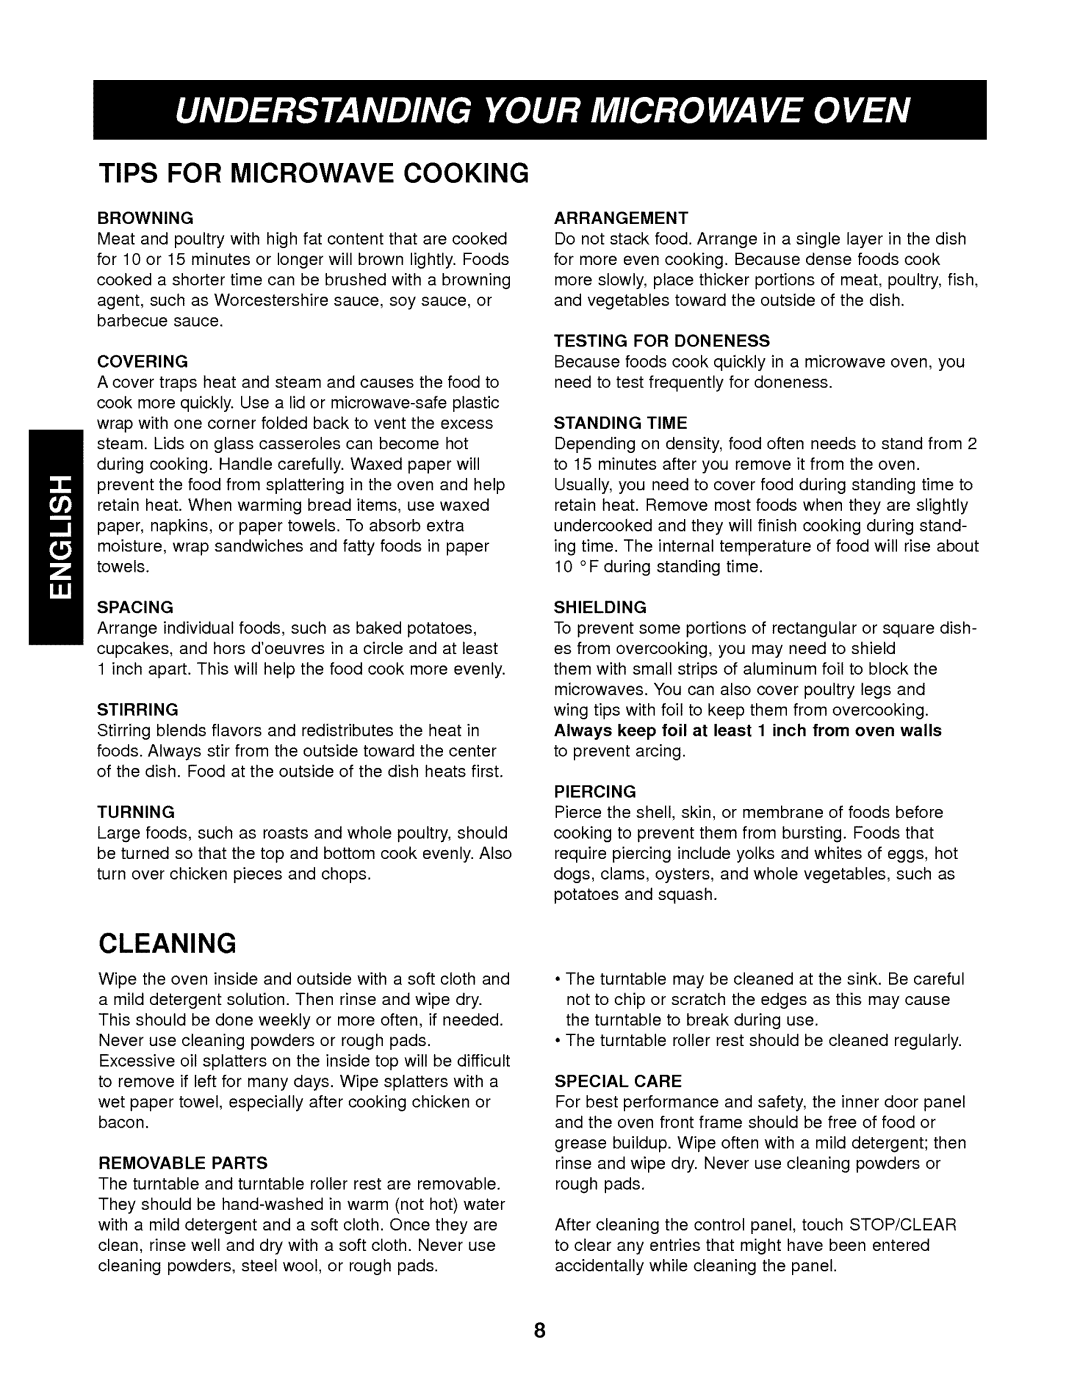 Kenmore 721.62342 manual Cleaning, Tips For Microwave Cooking 